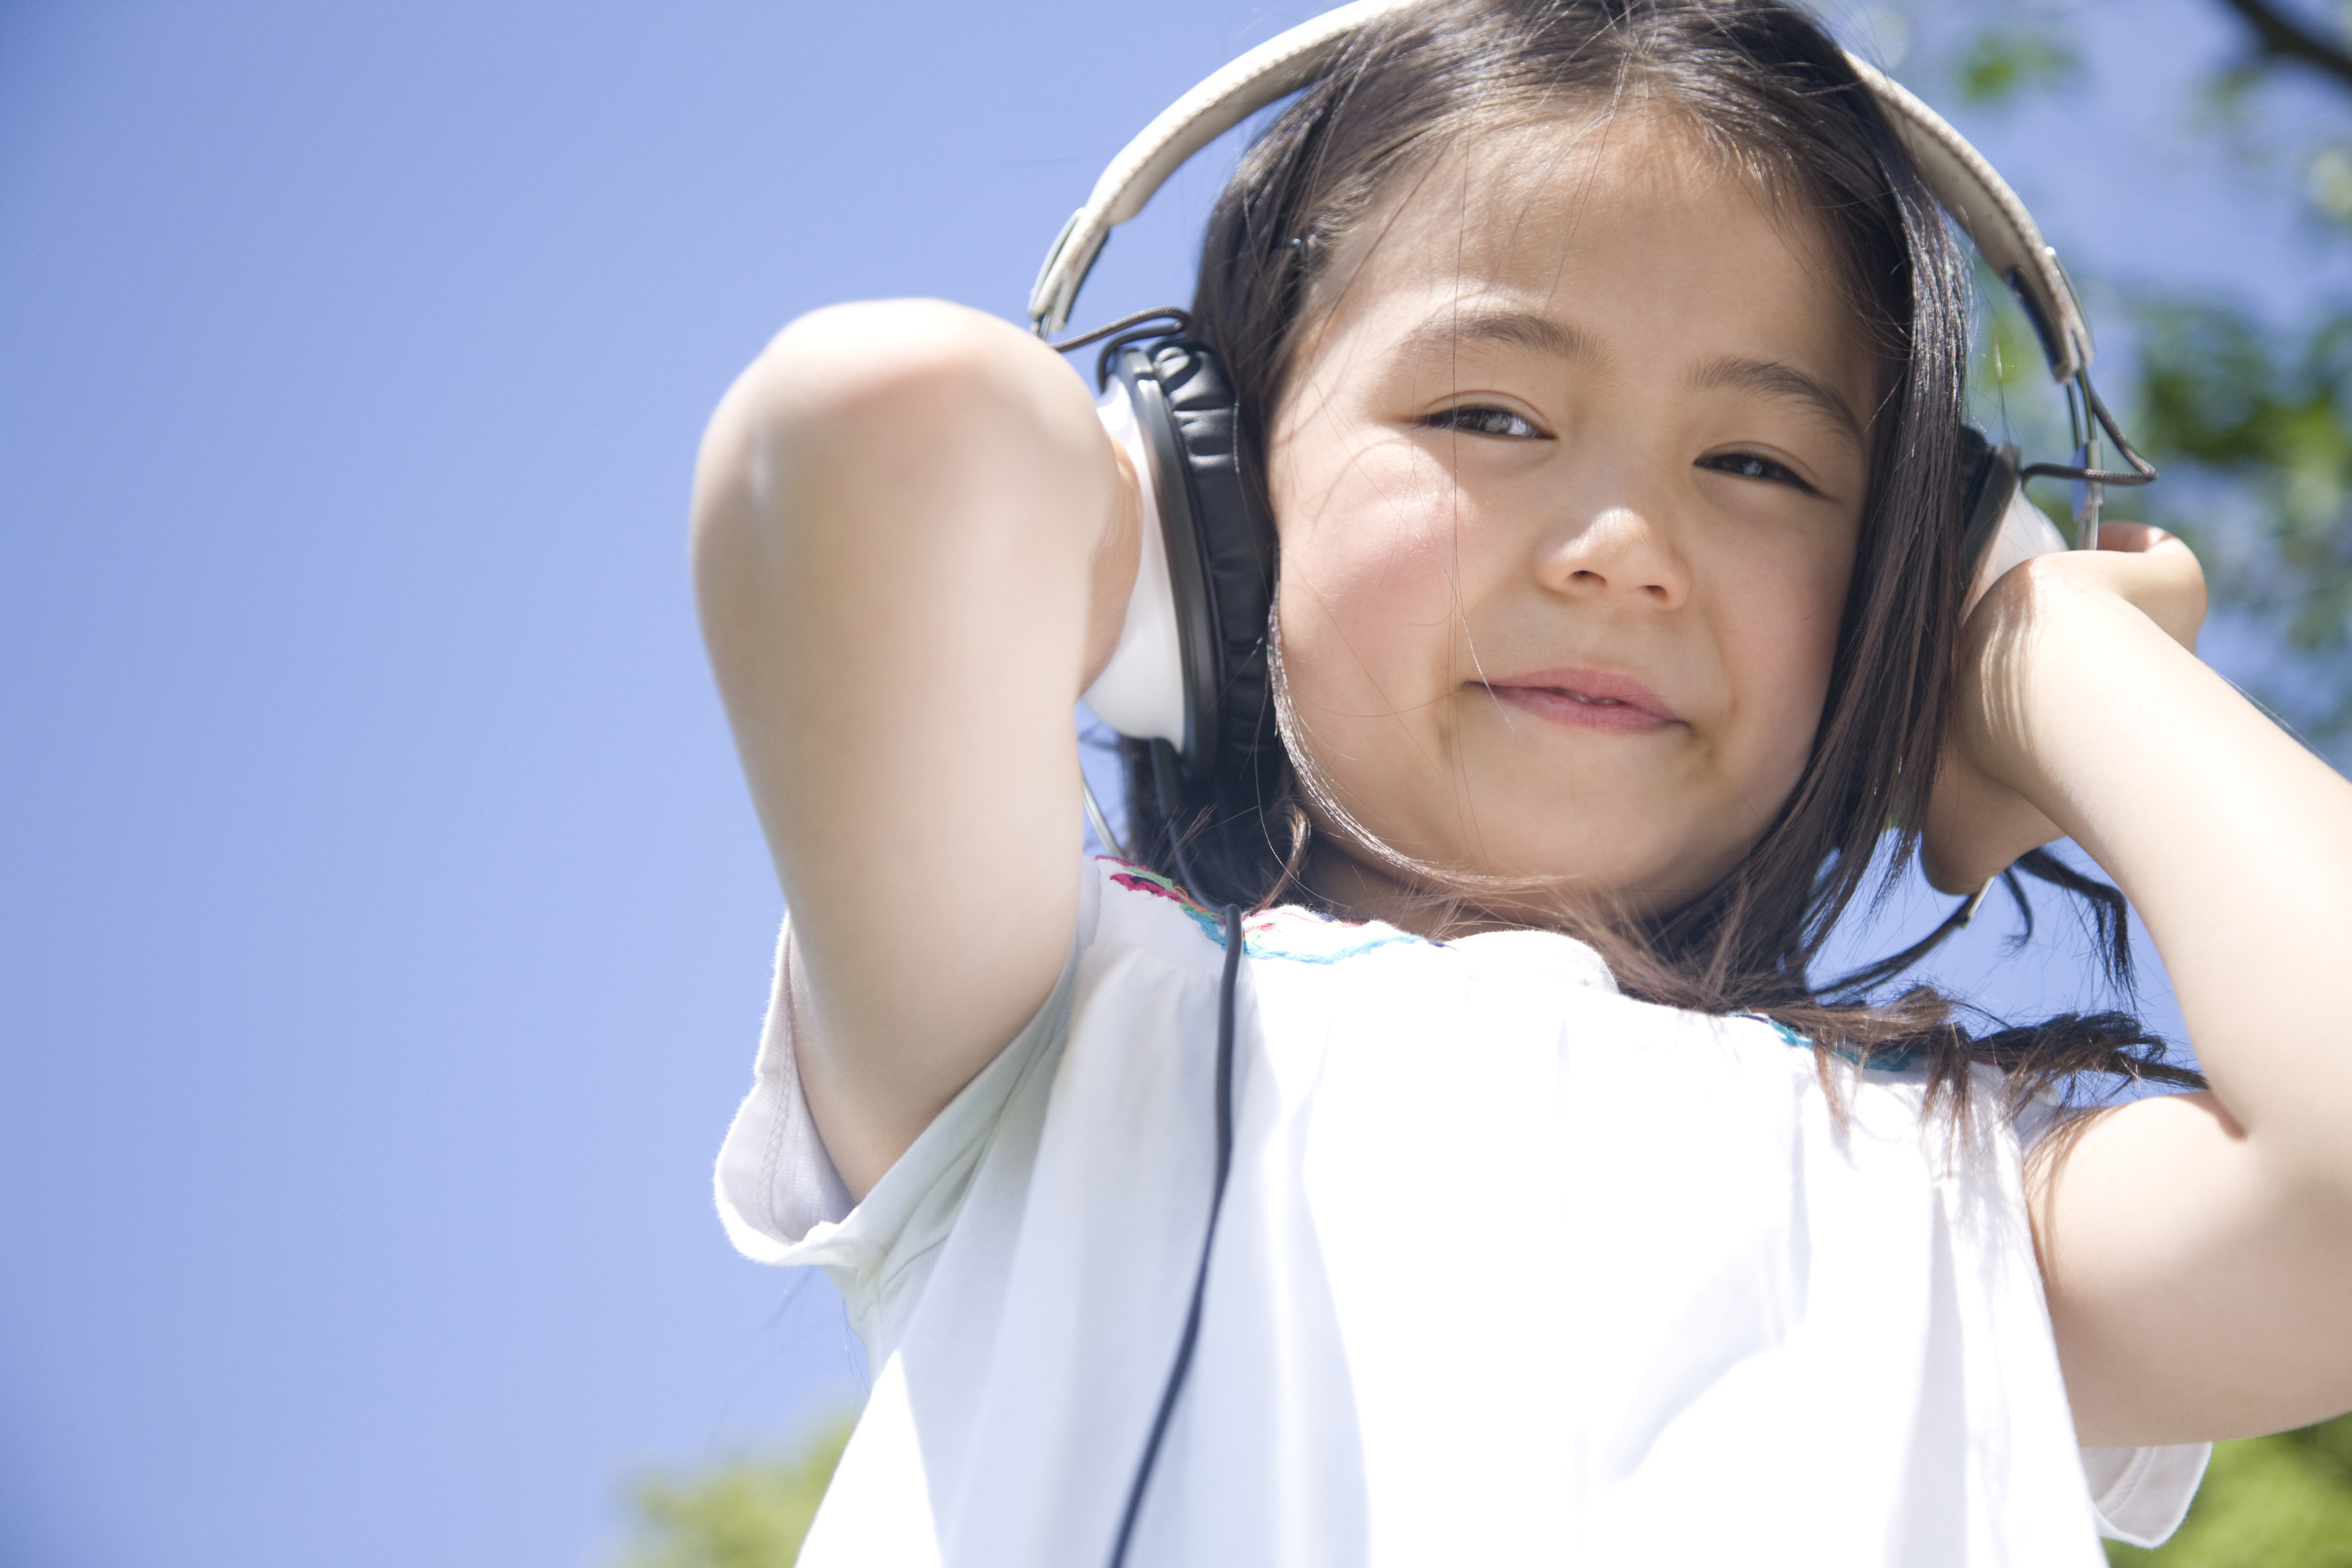 Listening to music not only makes us feel happy, it can do other cool things too! Photo: Shutterstock 